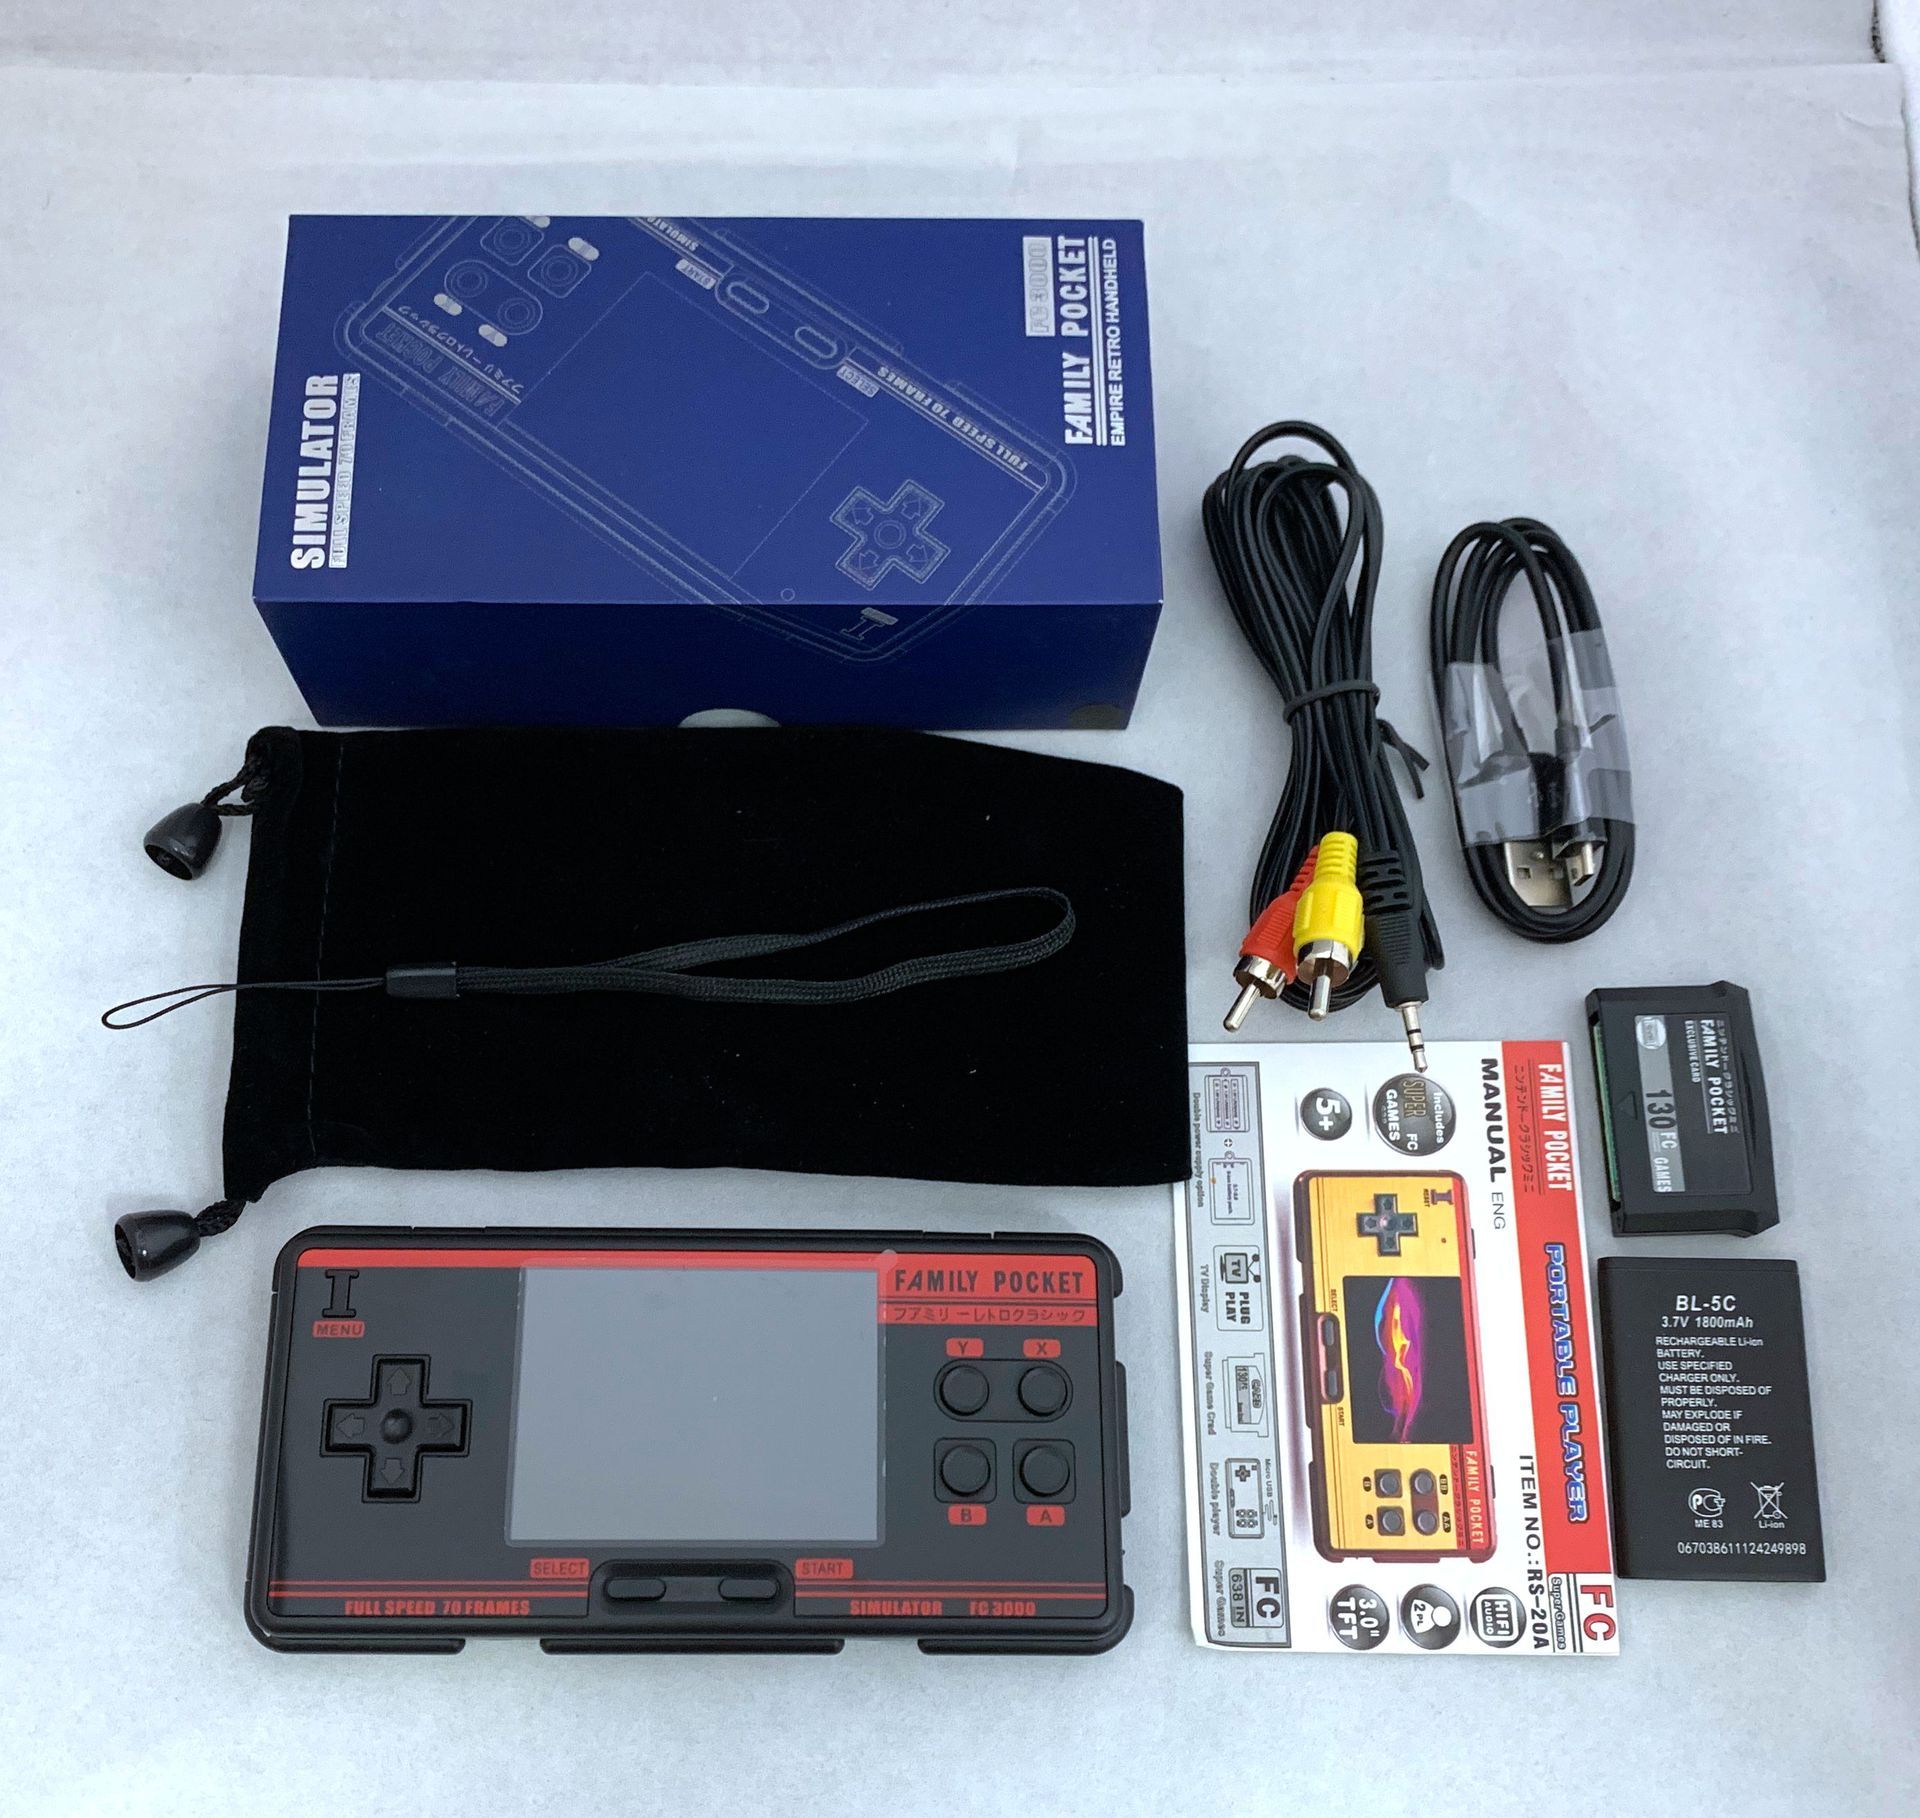 FC3000-2GB-1094-Games-Retro-Handheld-Video-Game-Console-3-inch-HD-8-Bit-Game-Player-for-FC-CPS1-MD-G-1716808